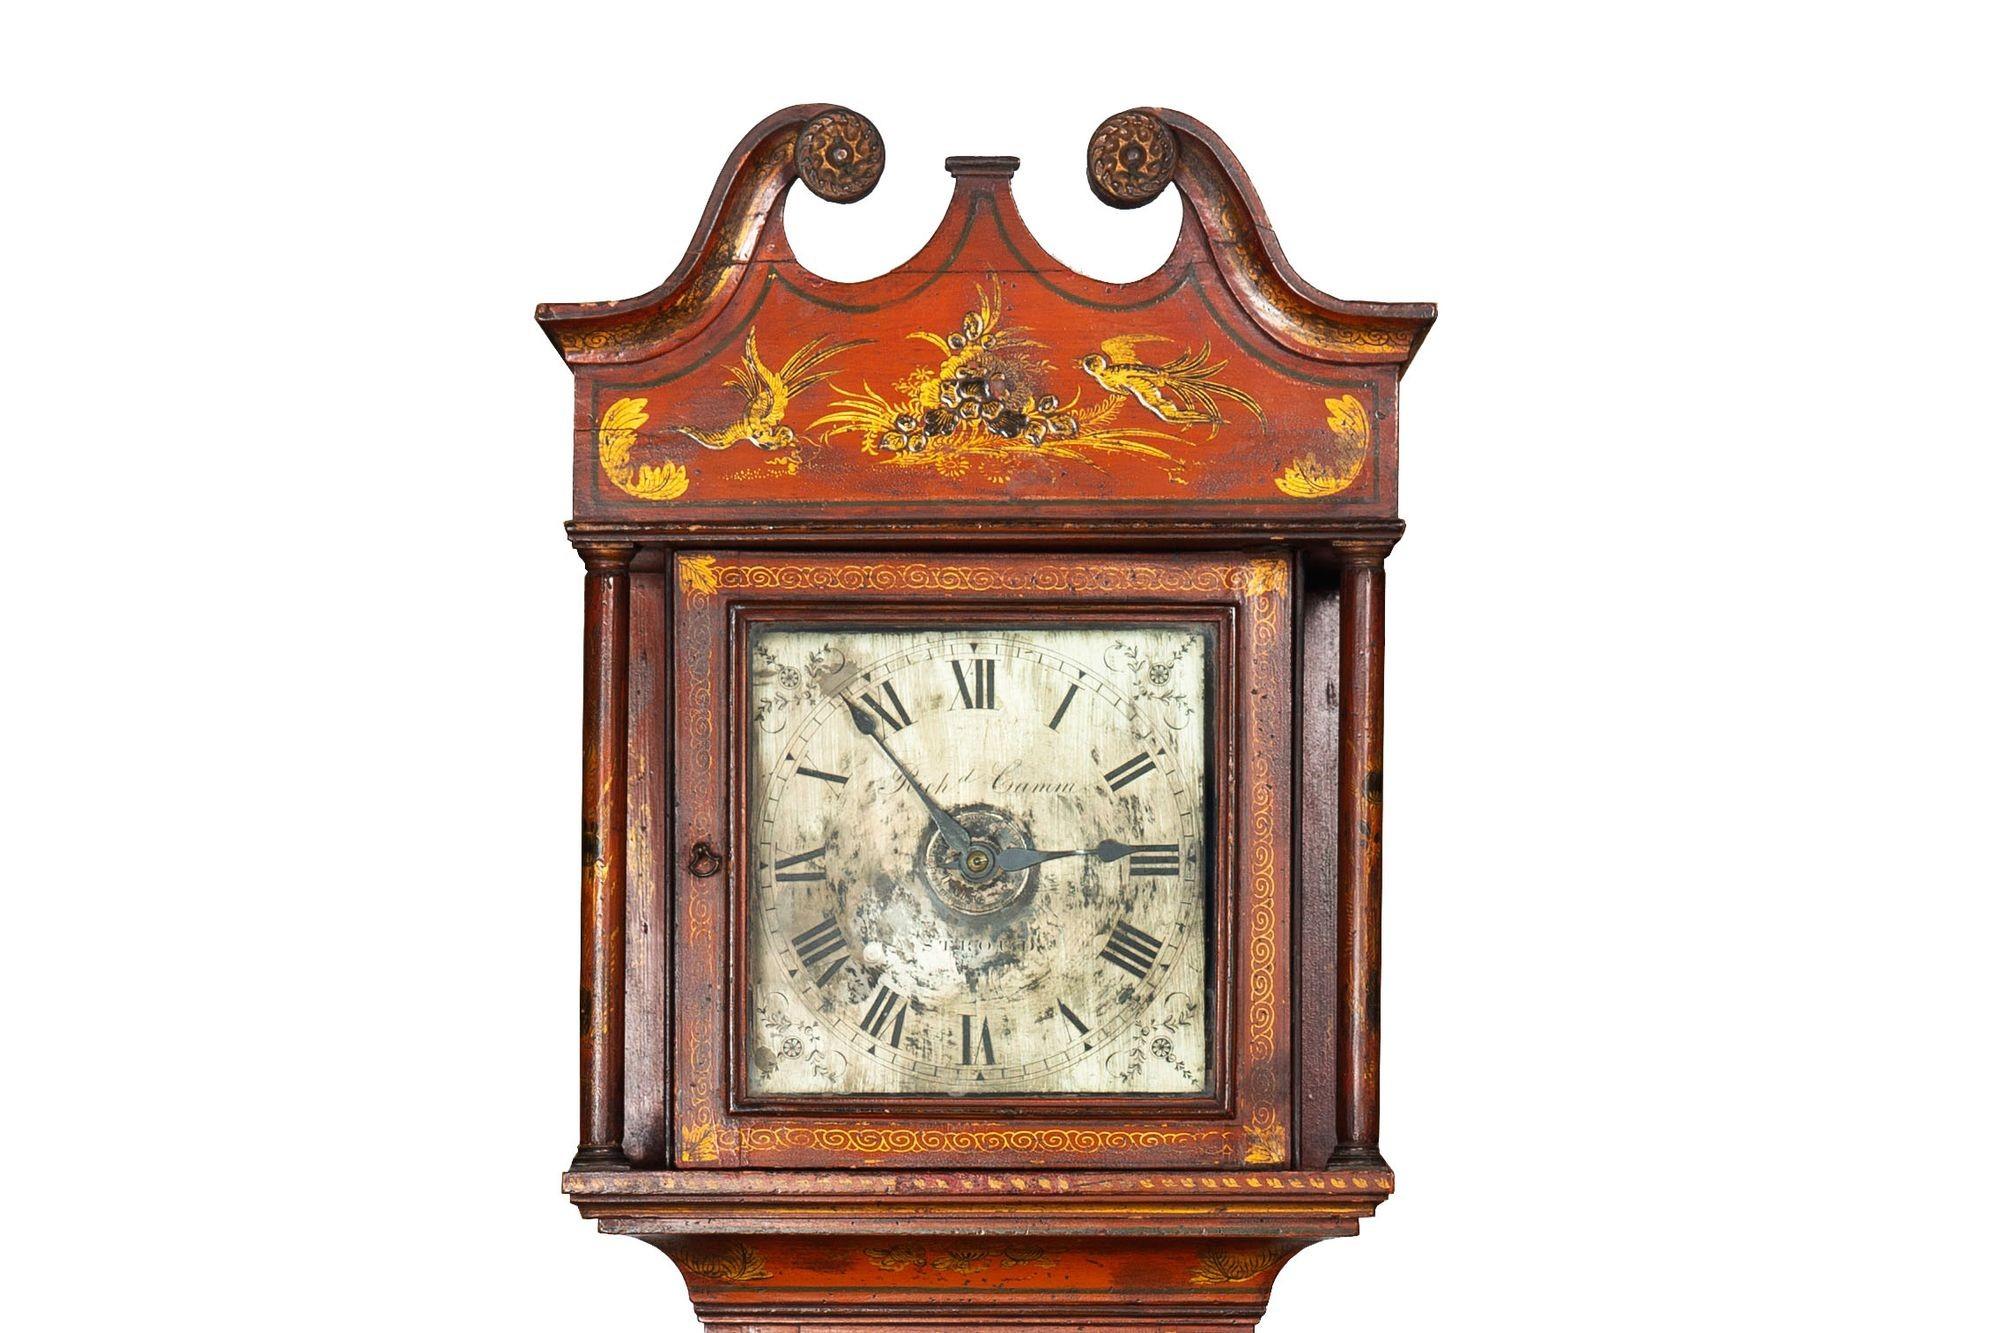 George III Horloge murale anglaise ancienne de style chinoiserie rouge à six branches, vers 1830 en vente